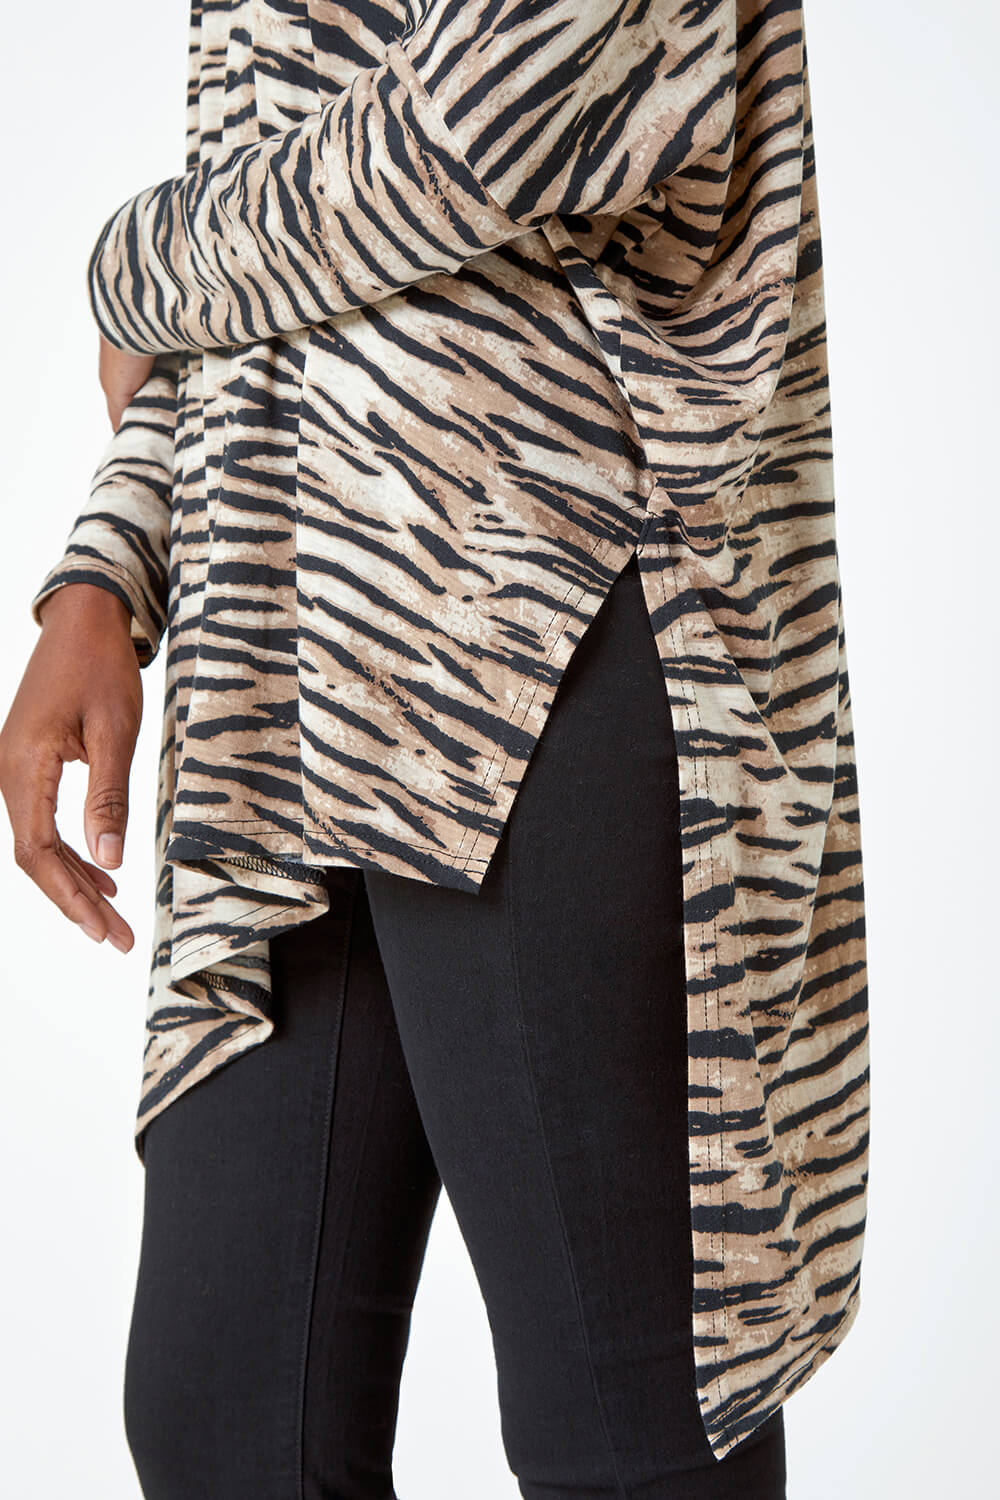 Natural  Animal Print Asymmetric Stretch Top, Image 5 of 5